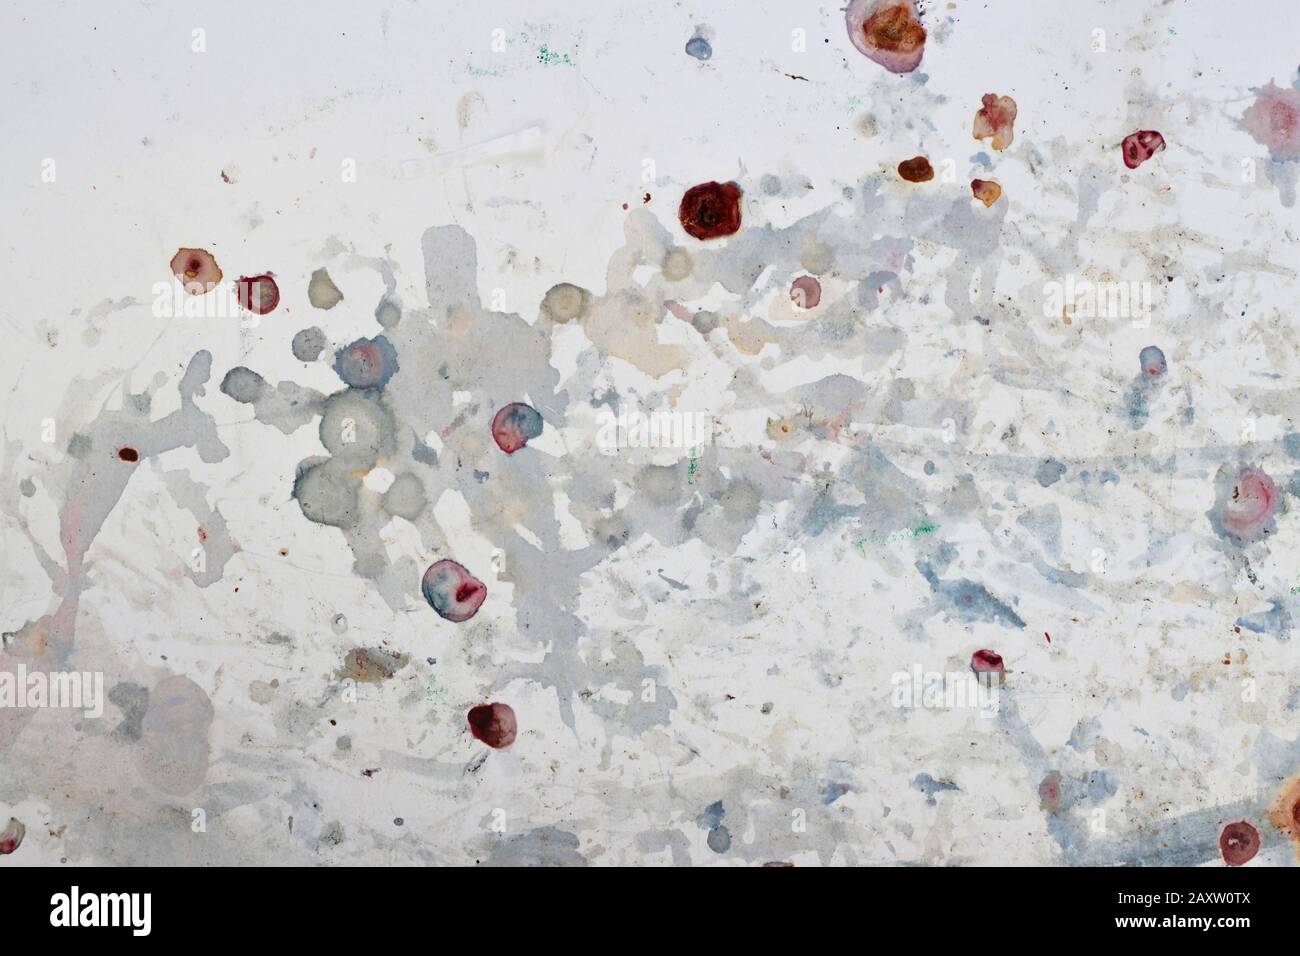 white abstract background with colorful blurry spots Stock Photo